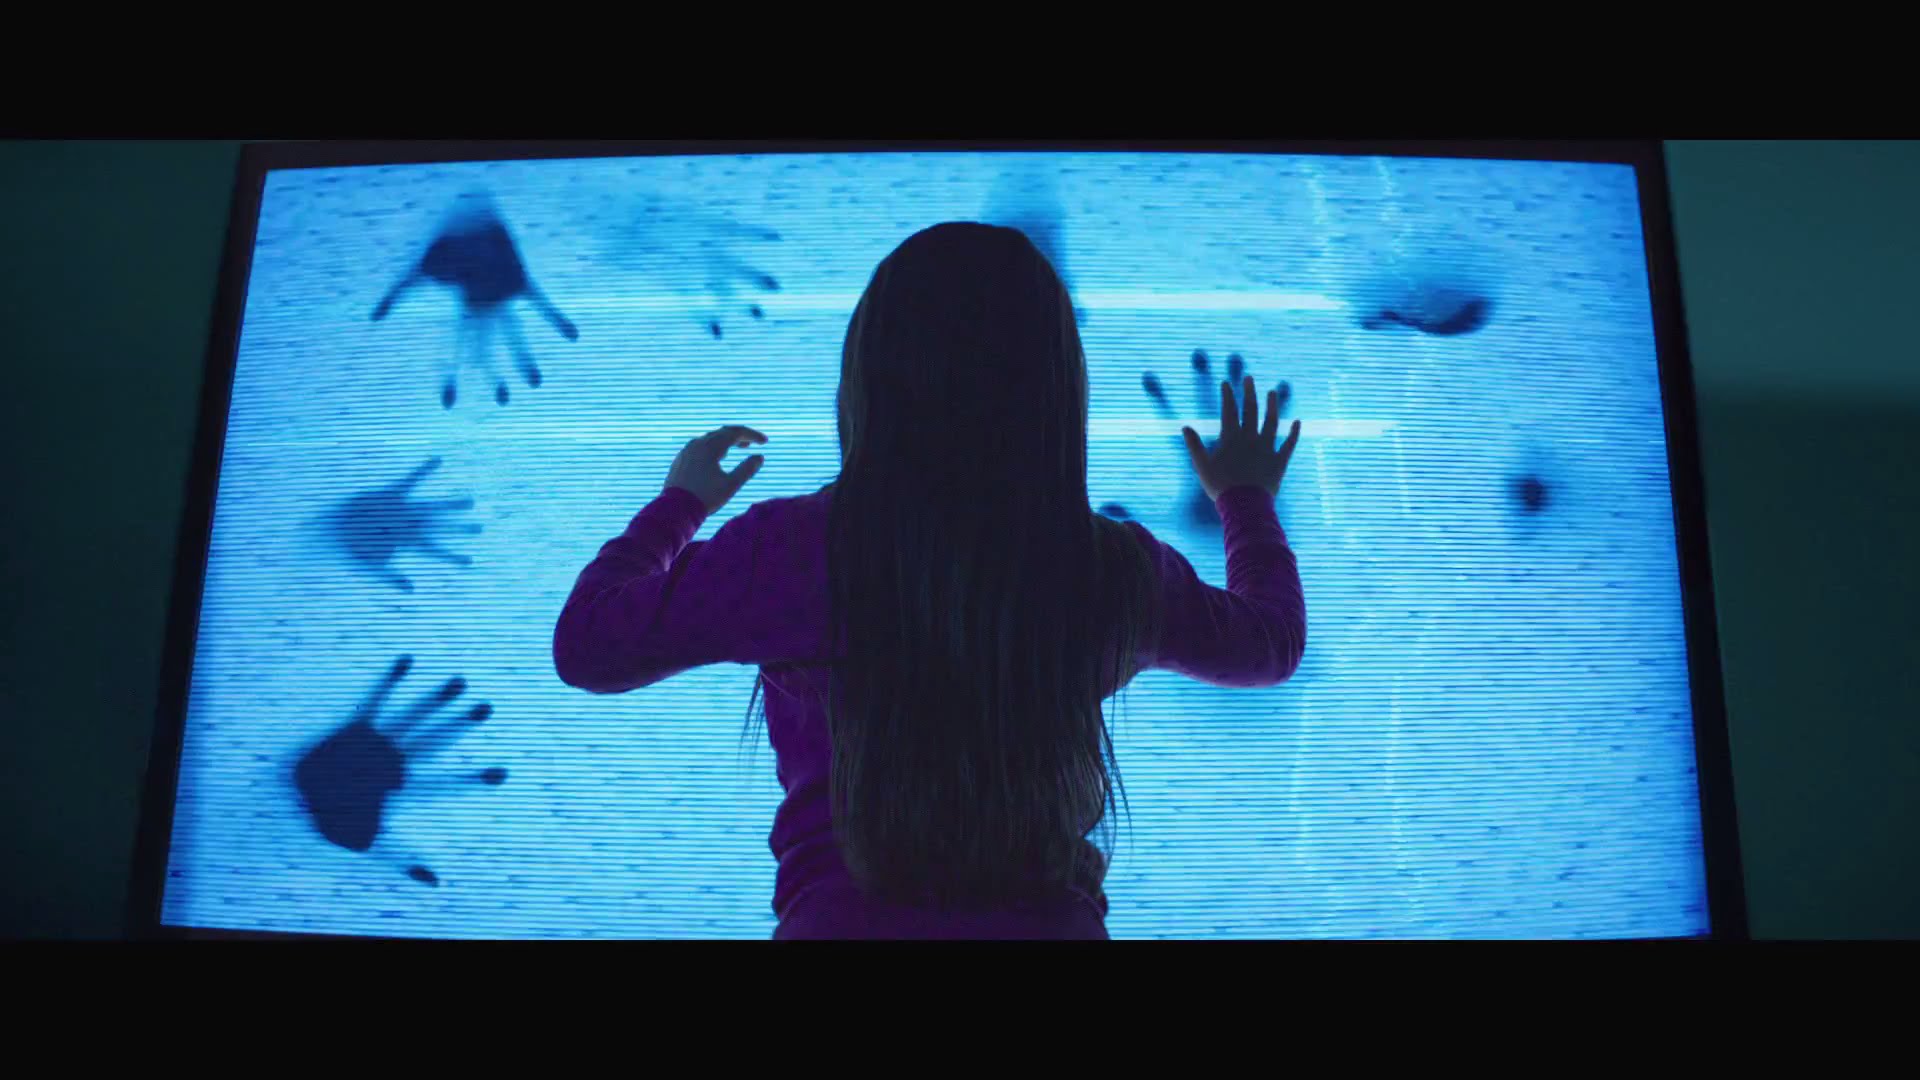 Poltergeist' Summons a Scary New Trailer | Spinoff Online | TV ...